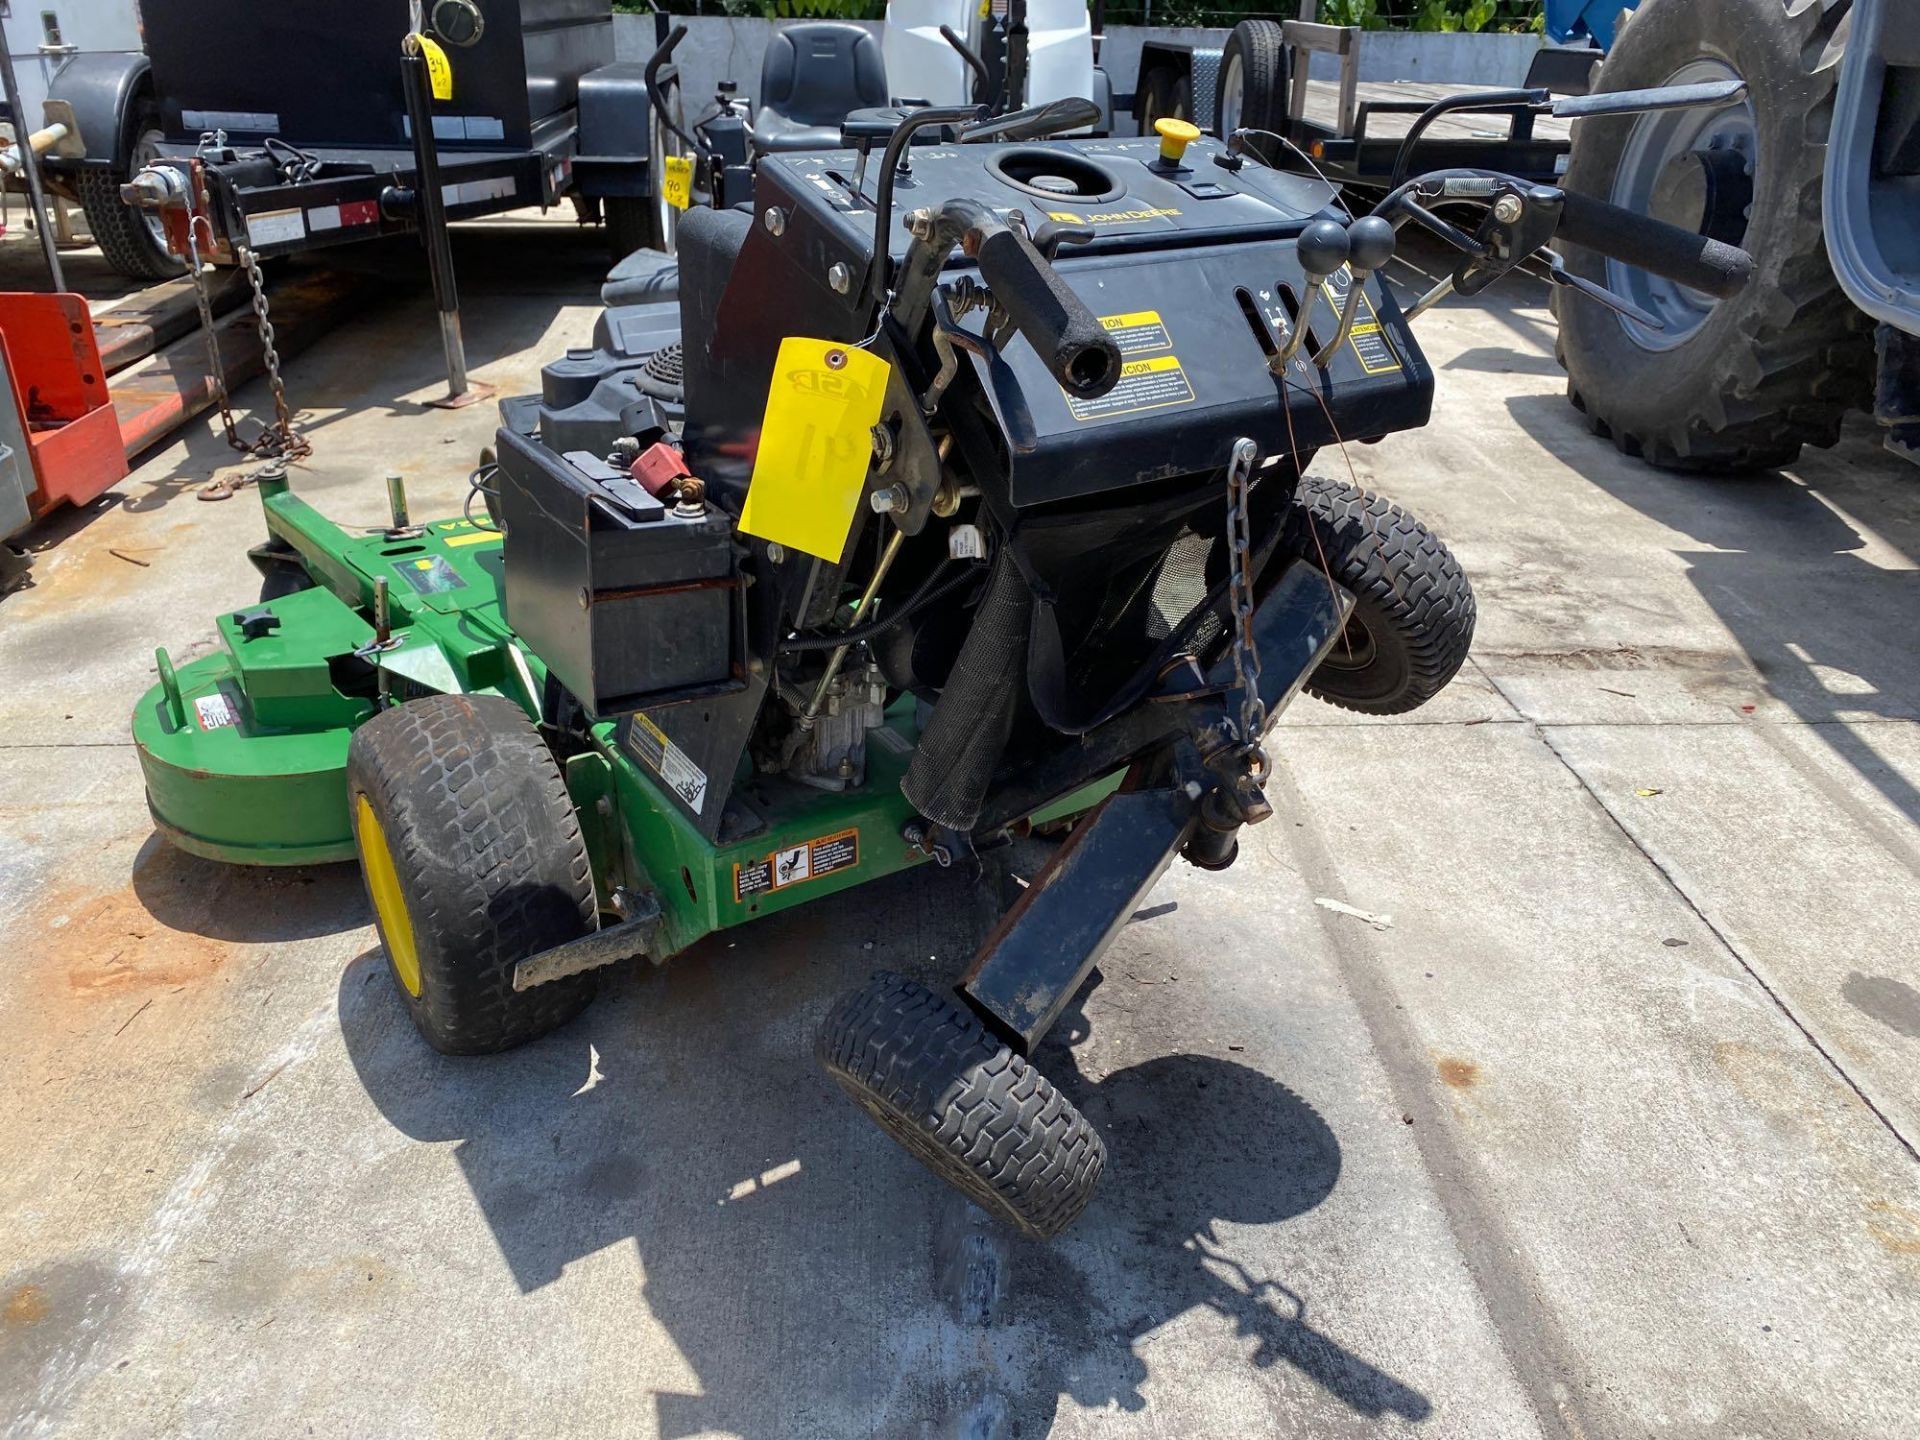 2015 JOHN DEER RIDE ON MOWER, GAS POWERED, RUNS AND OPERATES - Image 6 of 8